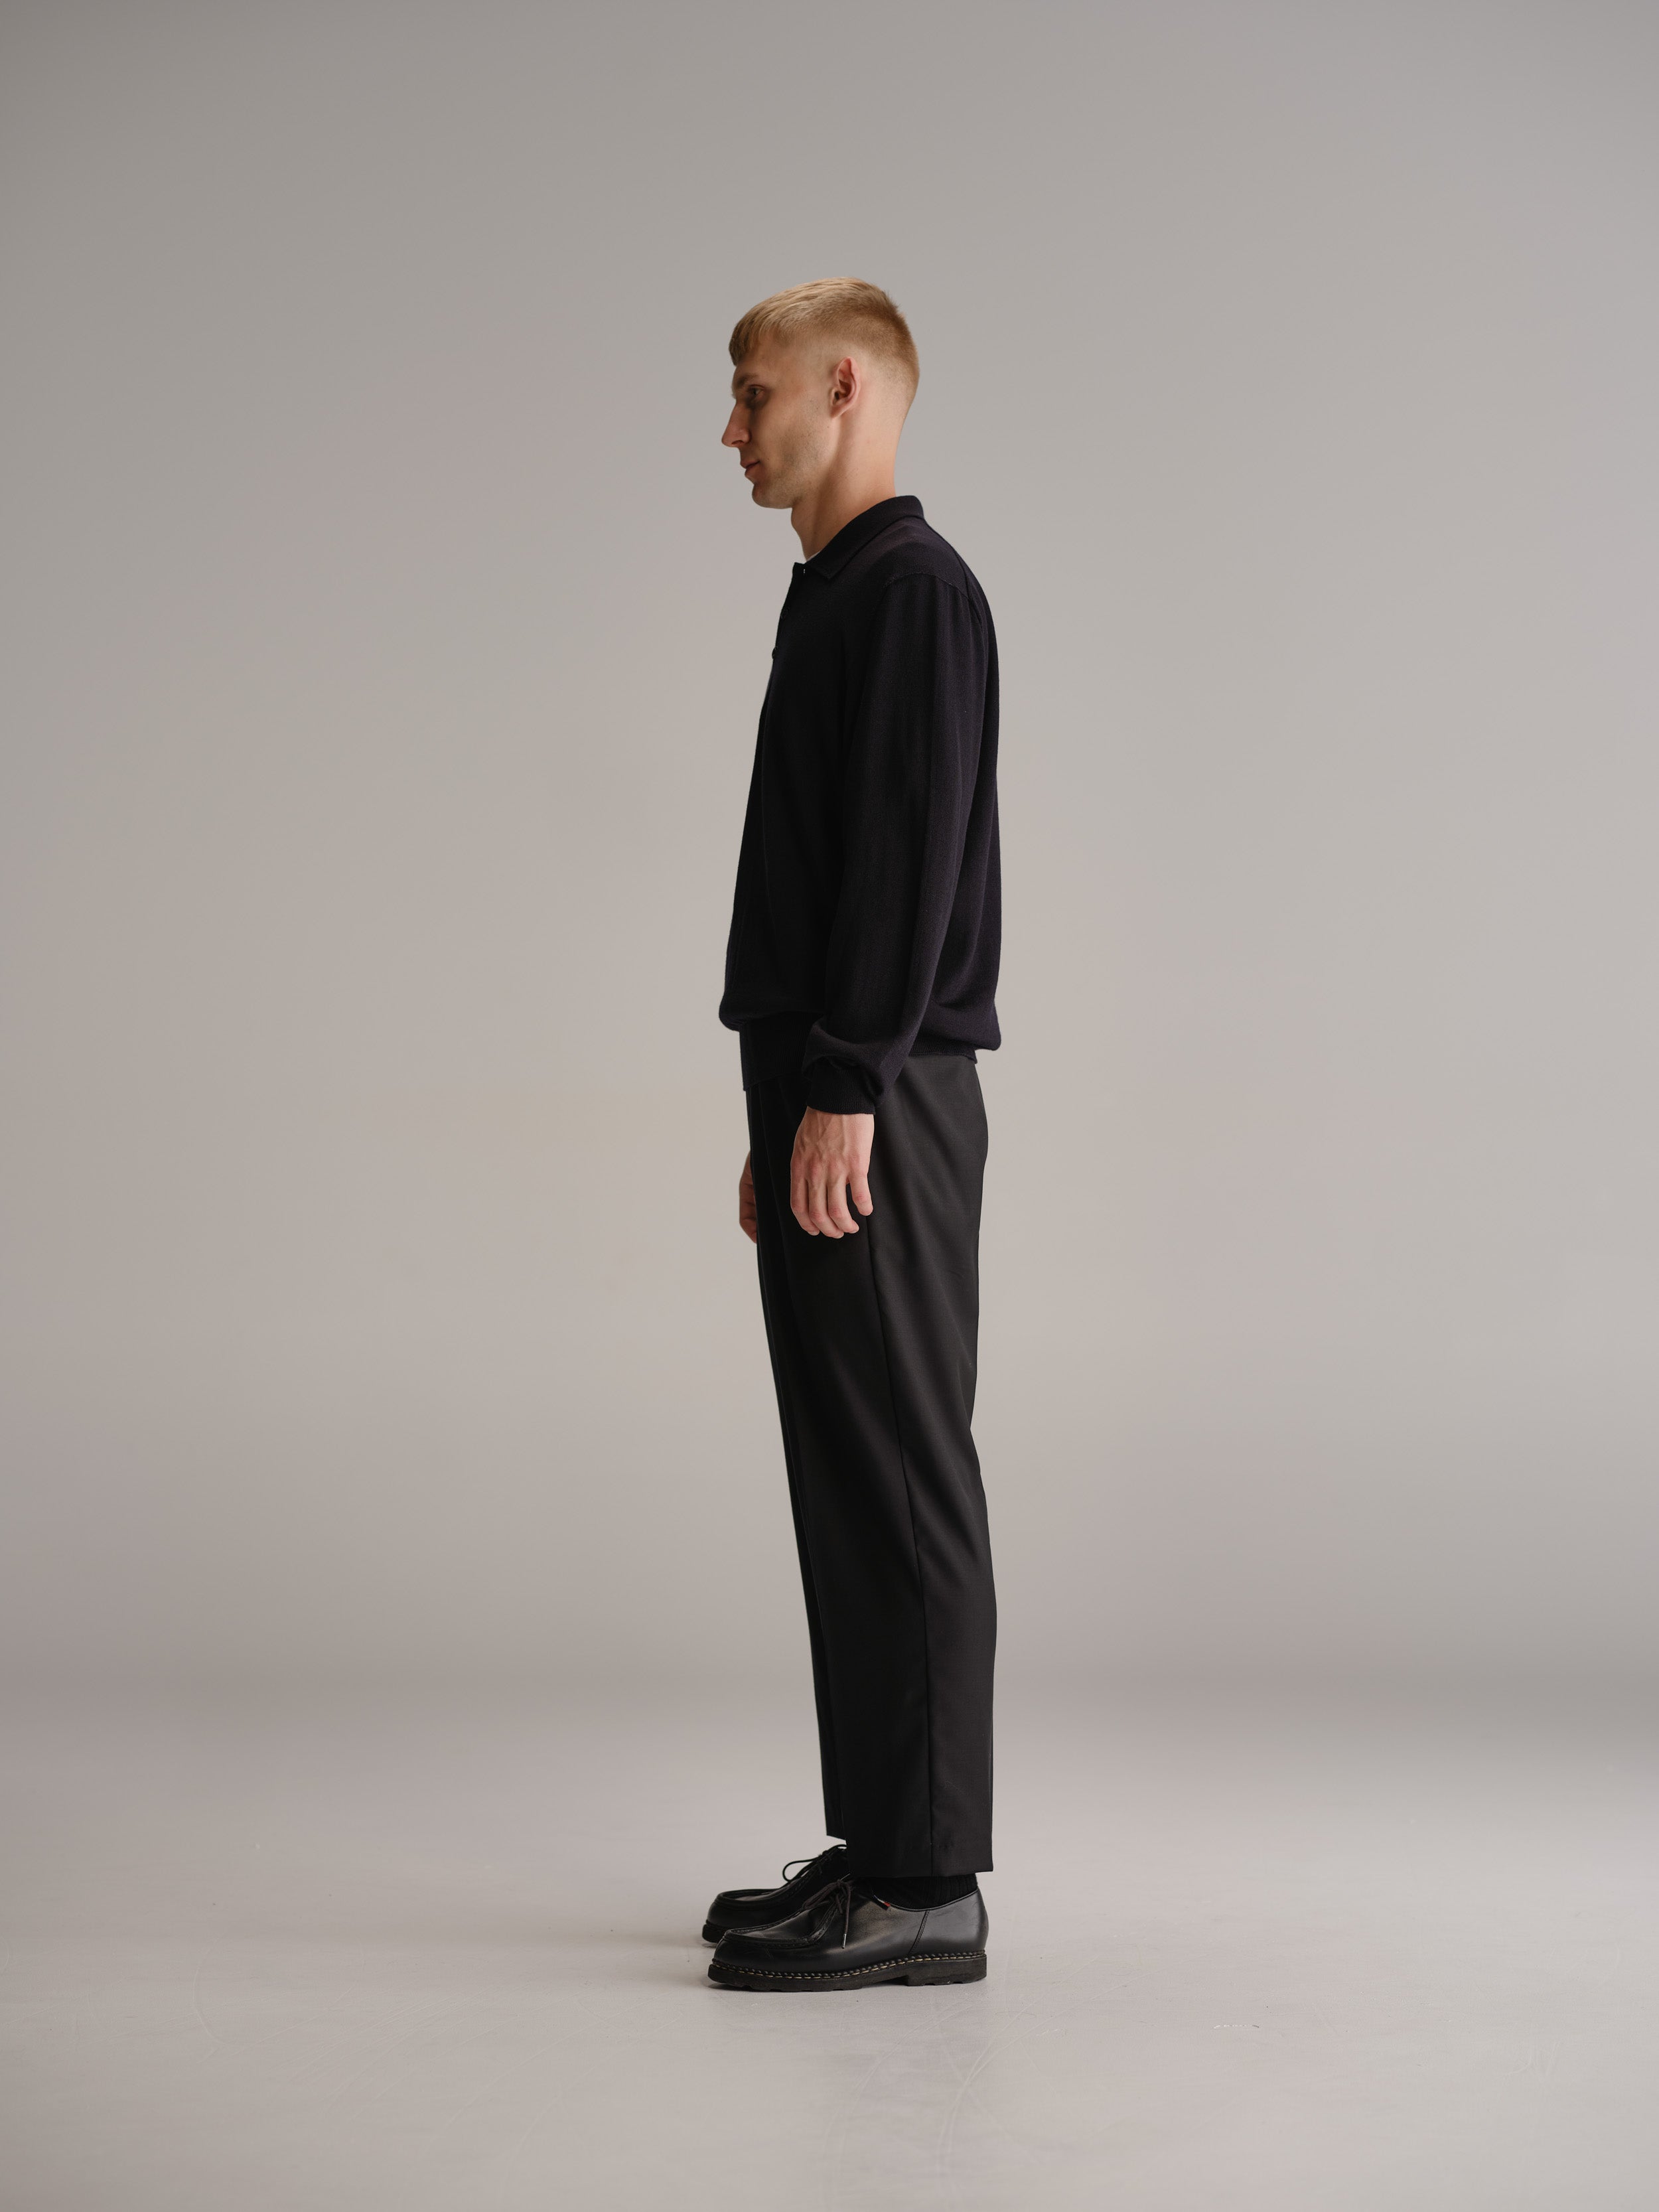 Side view of man standing in white studio wearing navy polo shirt, black wool trousers and black leather shoes.